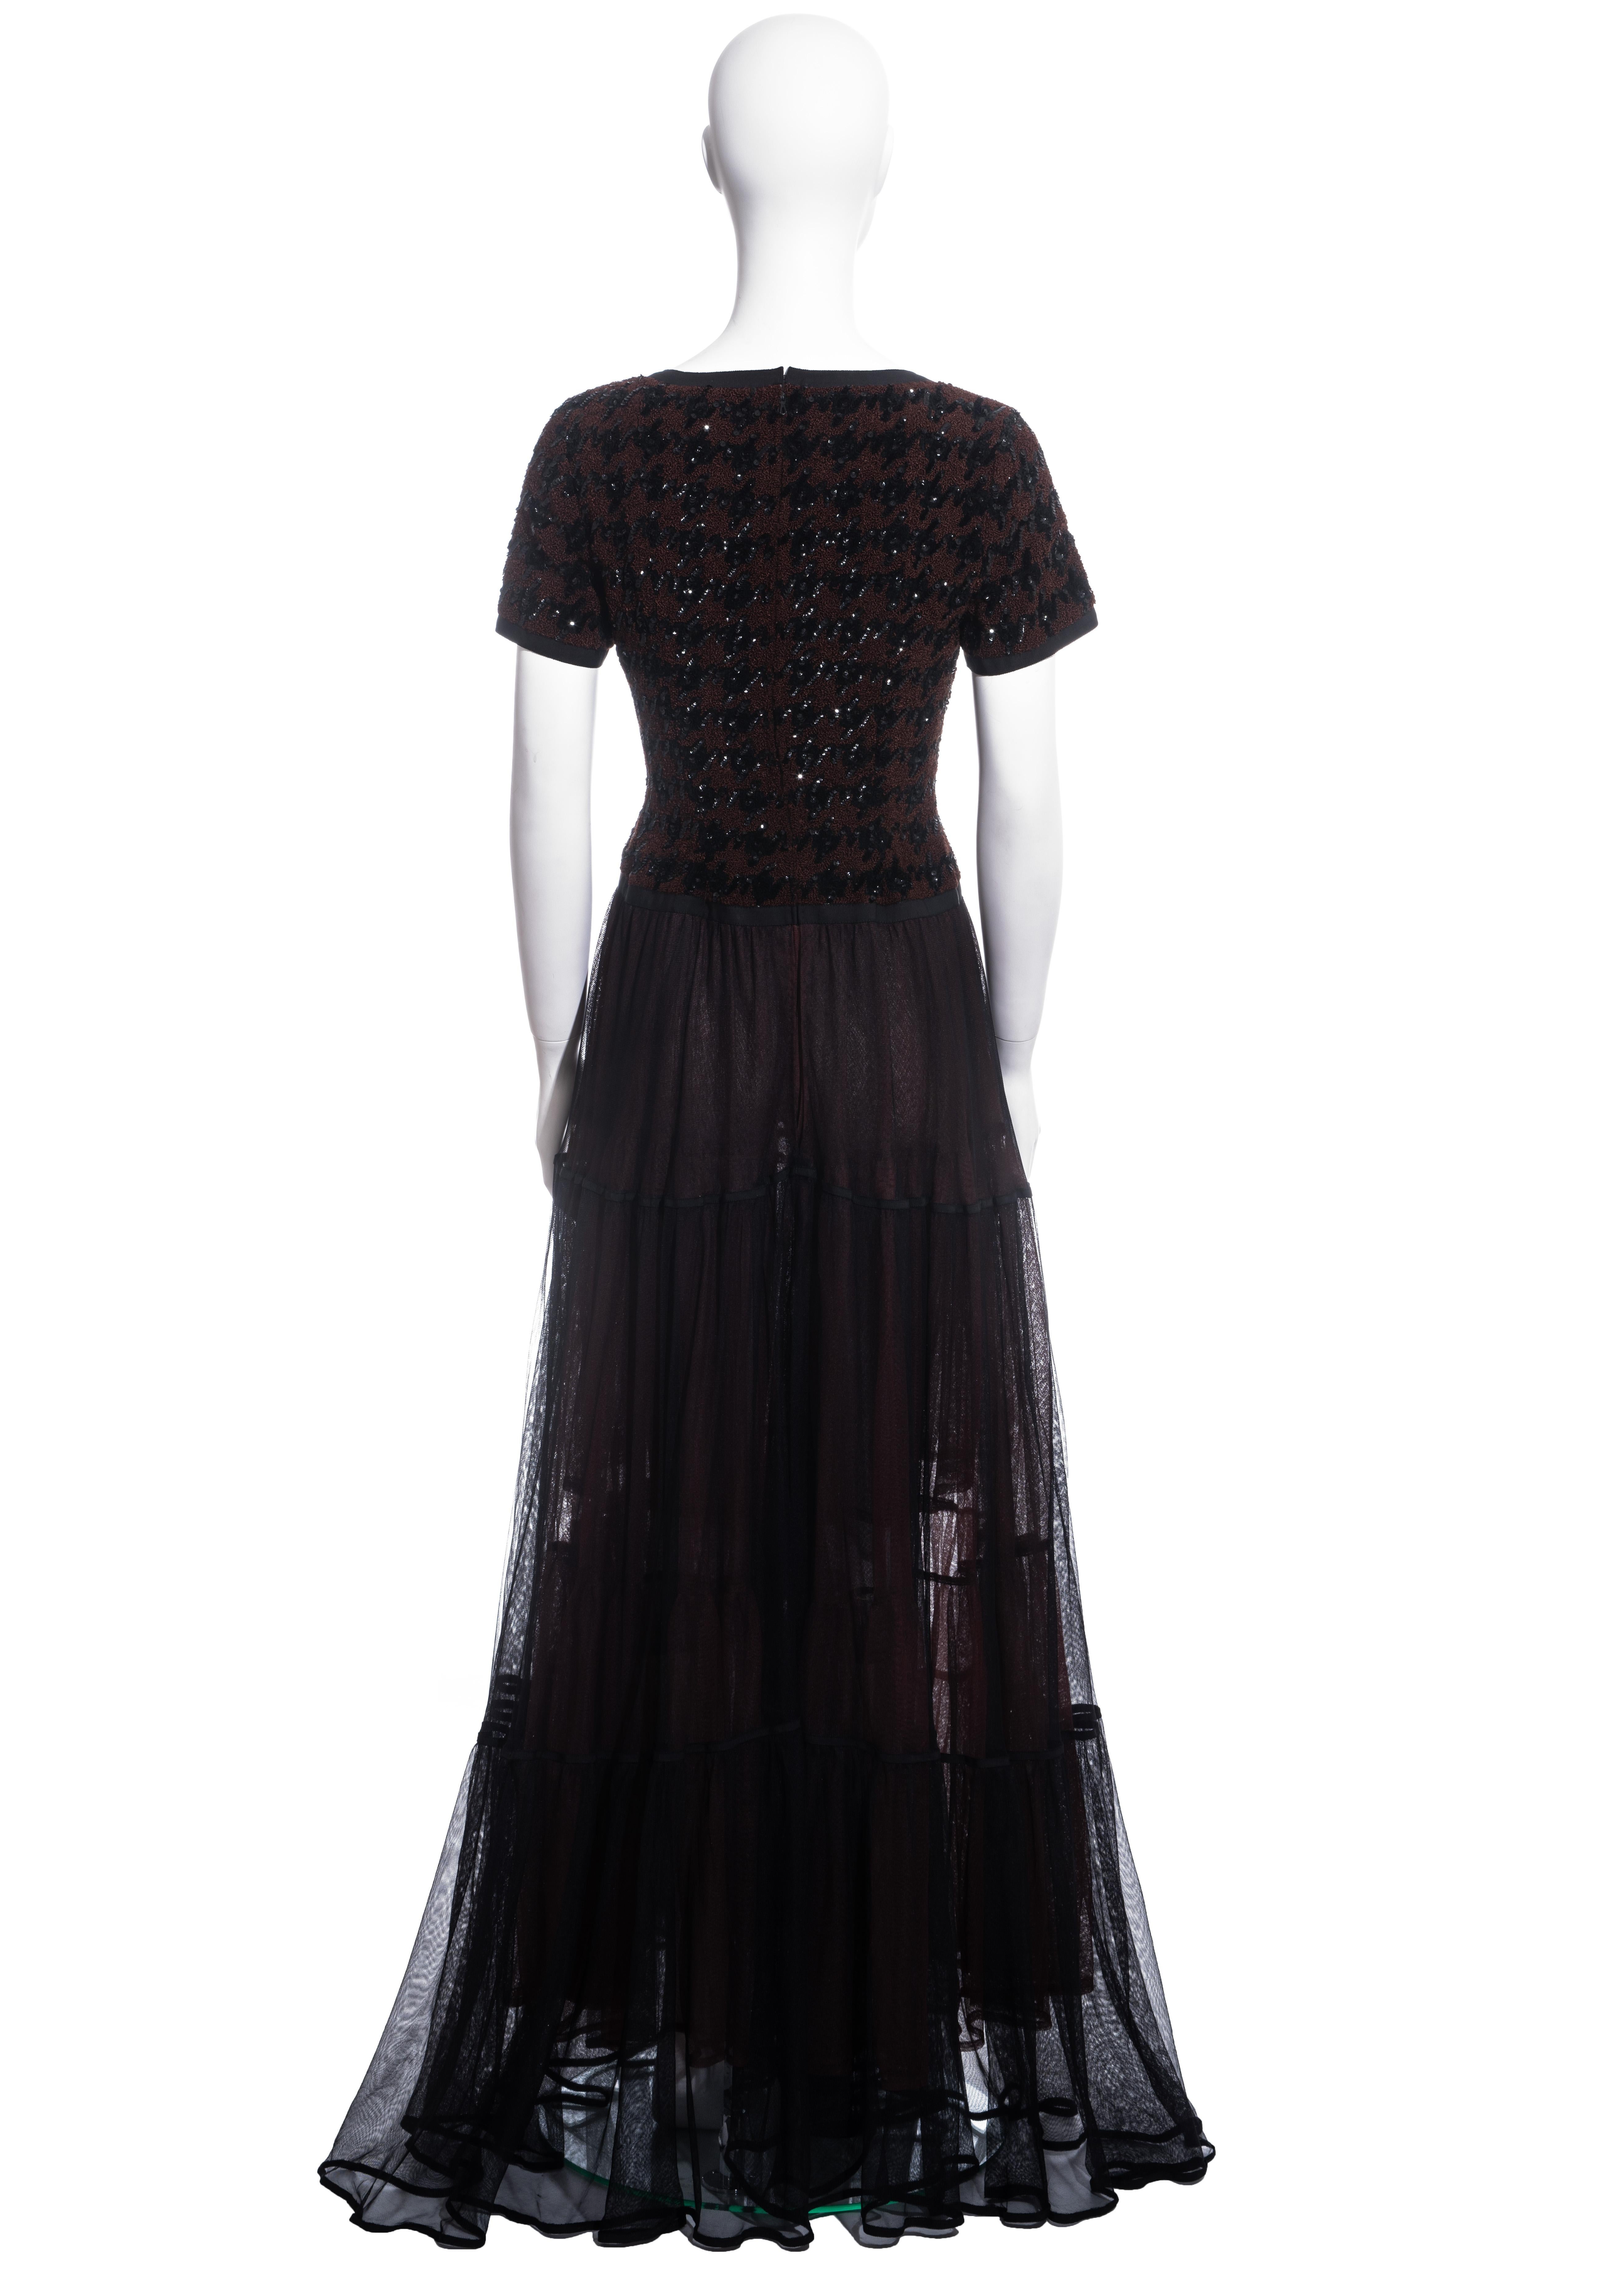 Women's Chanel by Karl Lagerfeld brown and black tweed and tulle sequin dress, fw 1991